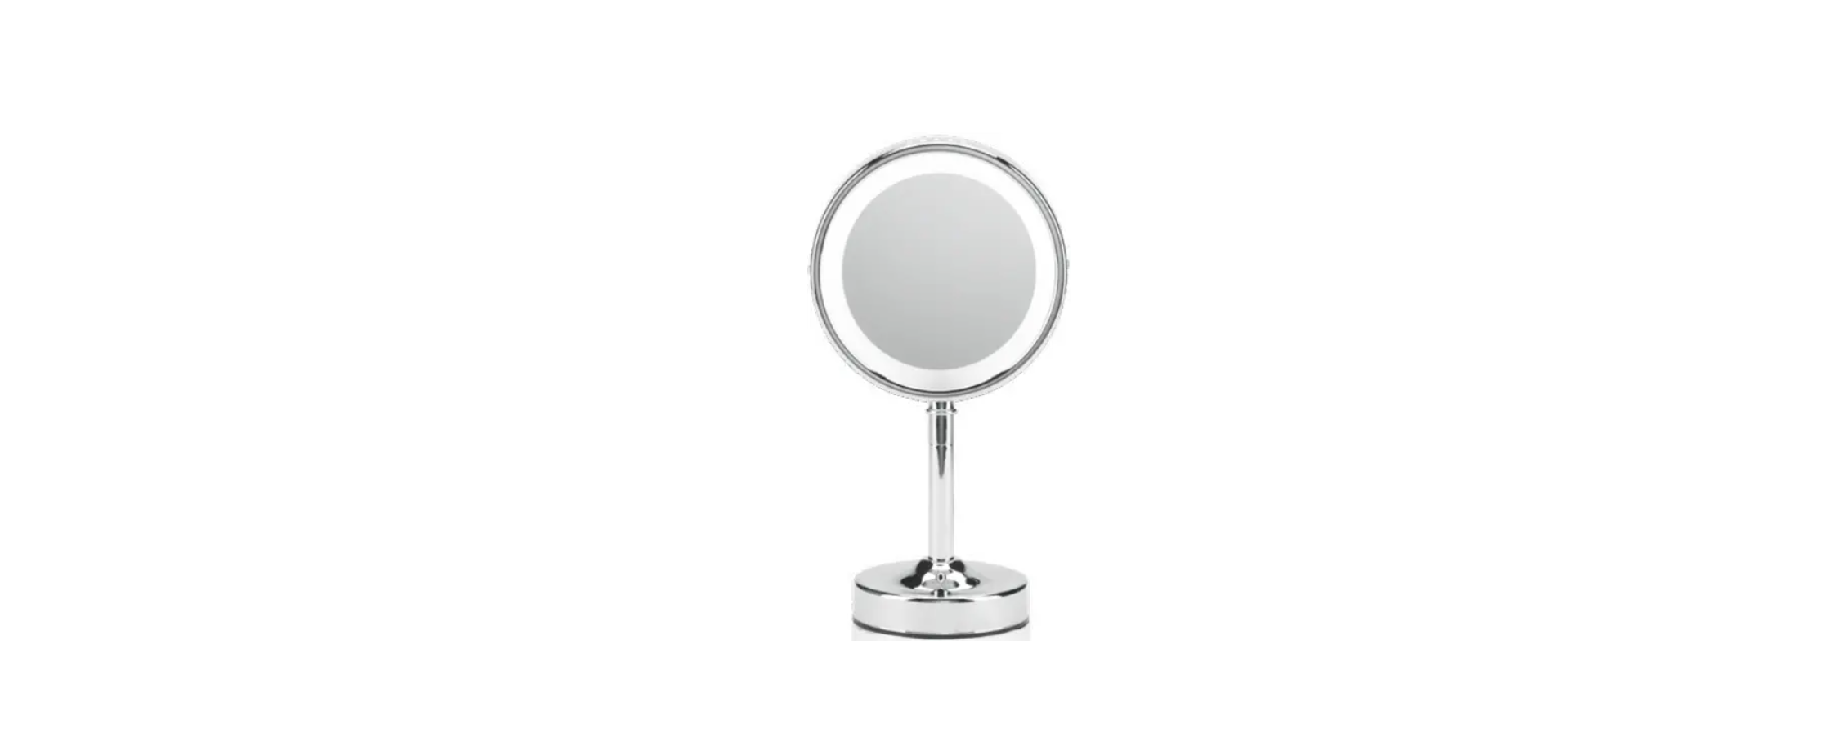 You are currently viewing CONAIR BE152WXR MAKEUP Mirror User Manual